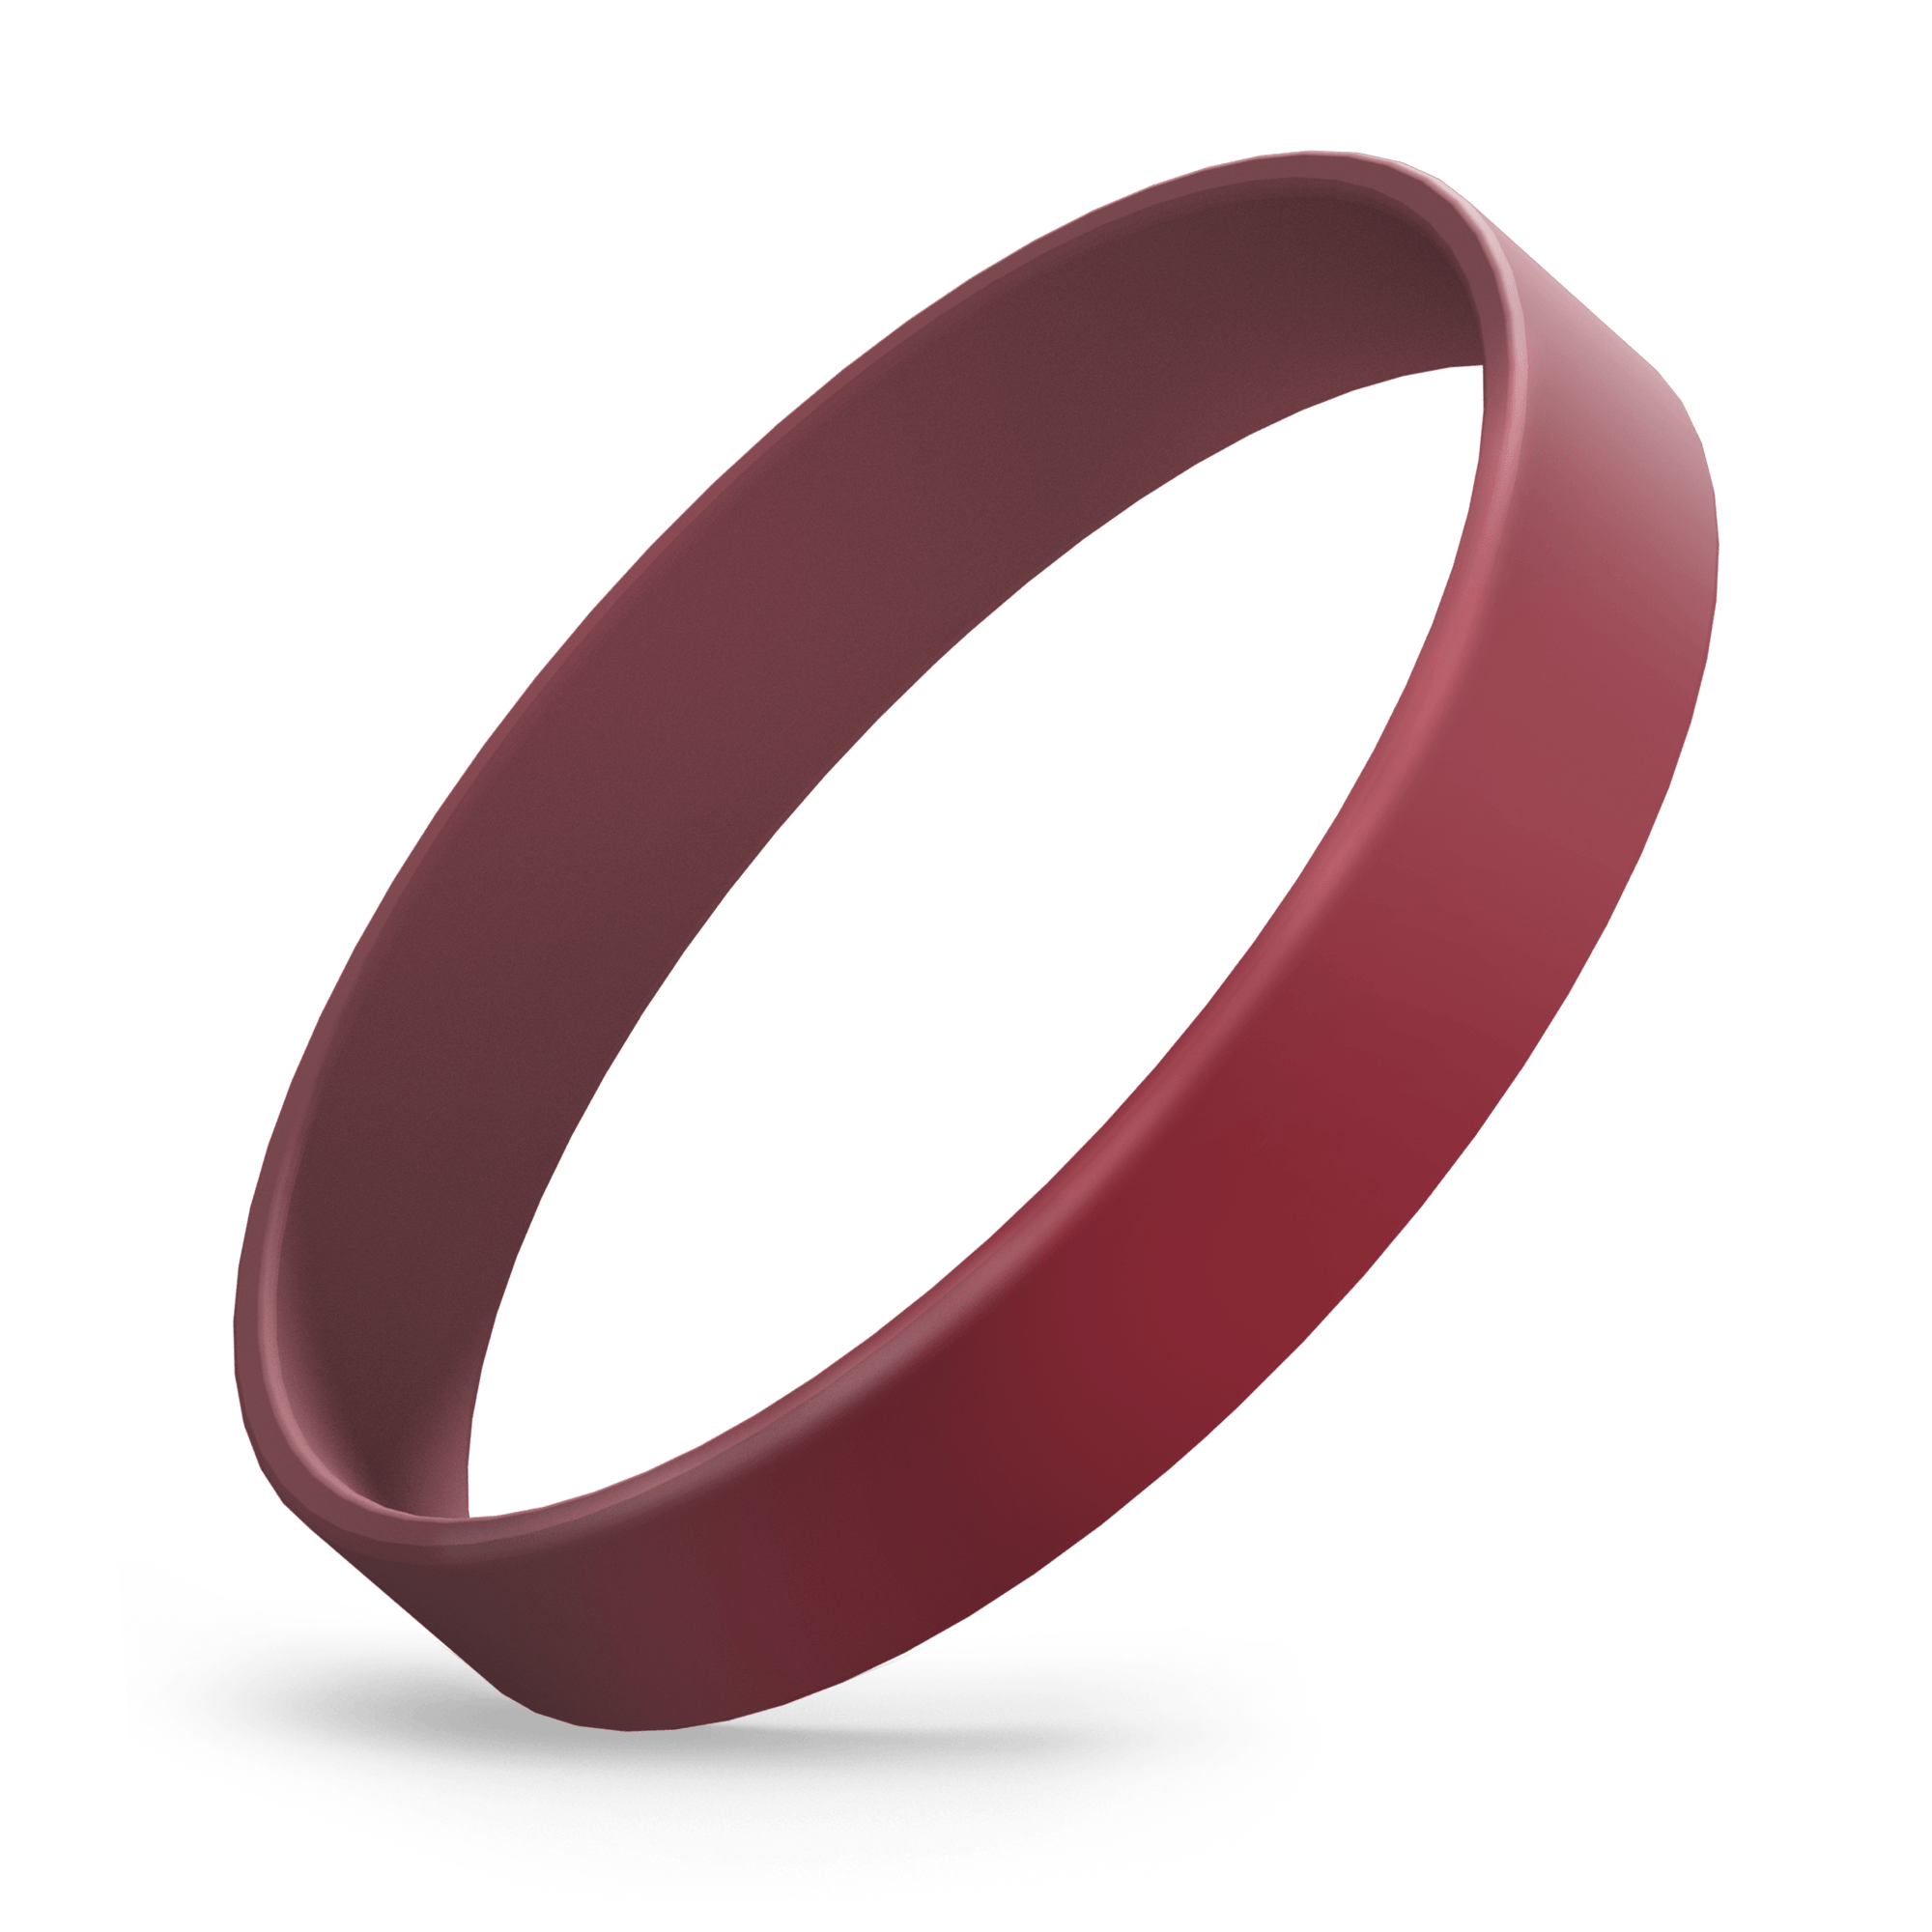 Custom Ink Injected (Maroon) Silicone Wristbands - Rubber Bracelets by Wristband Resources